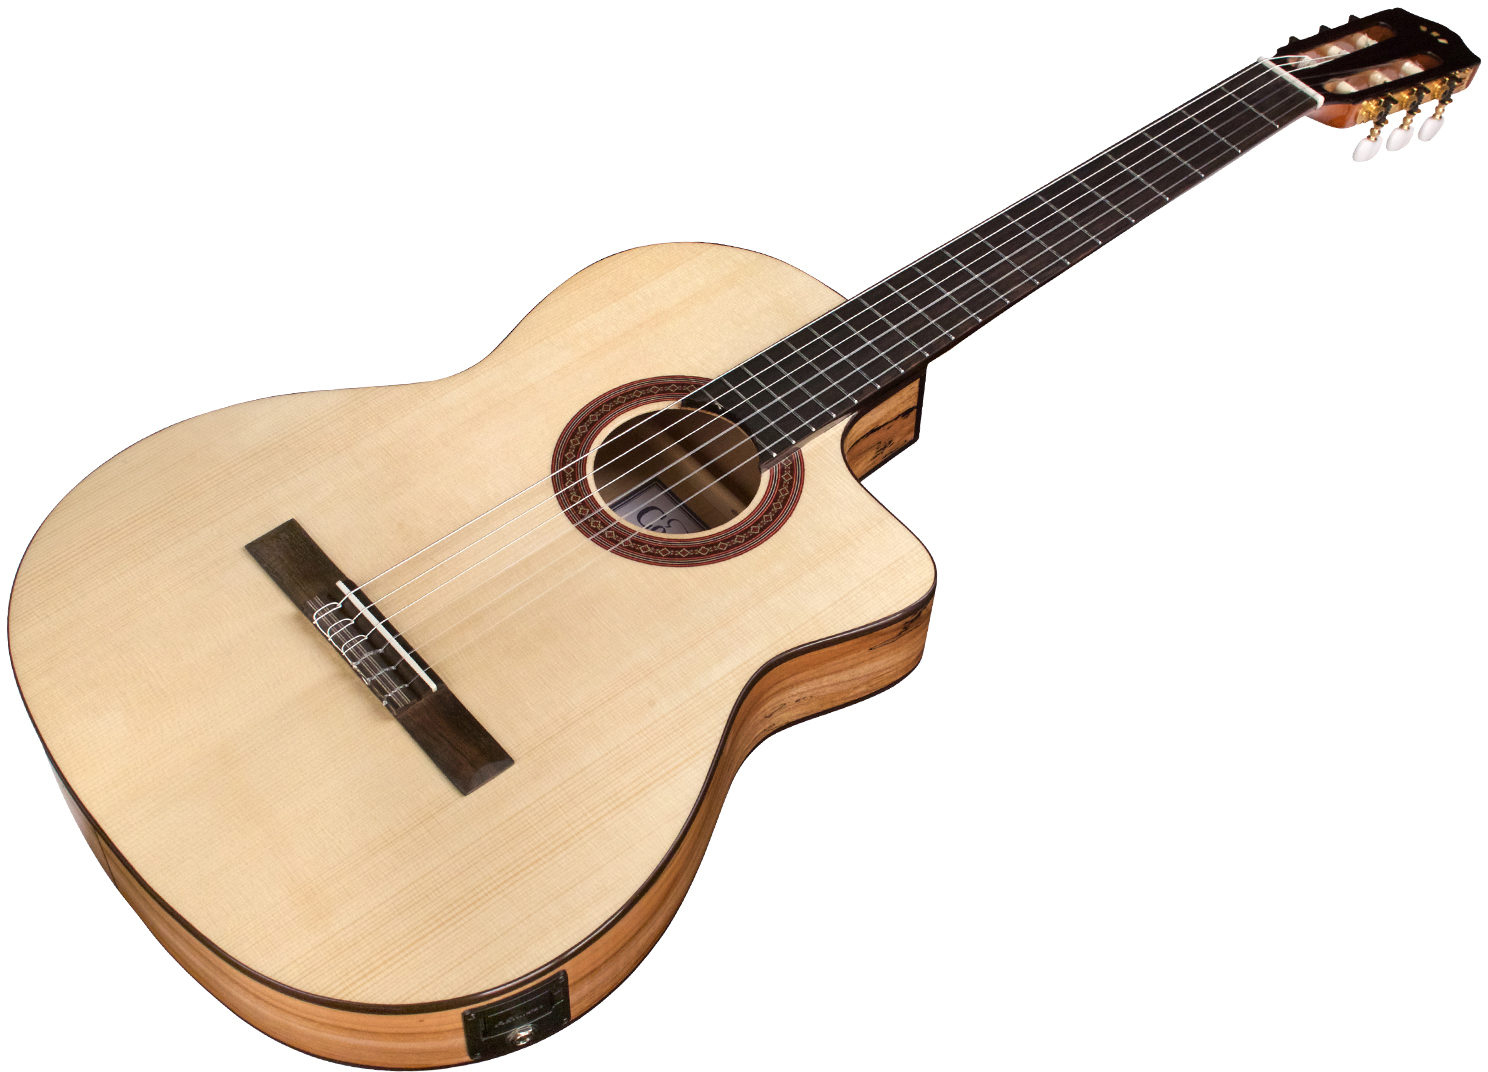 Cordoba C5 Cet Spalted Maple Limited Thinbody Cw Epicea Erable Pf - Natural - Guitare Classique Format 4/4 - Variation 2